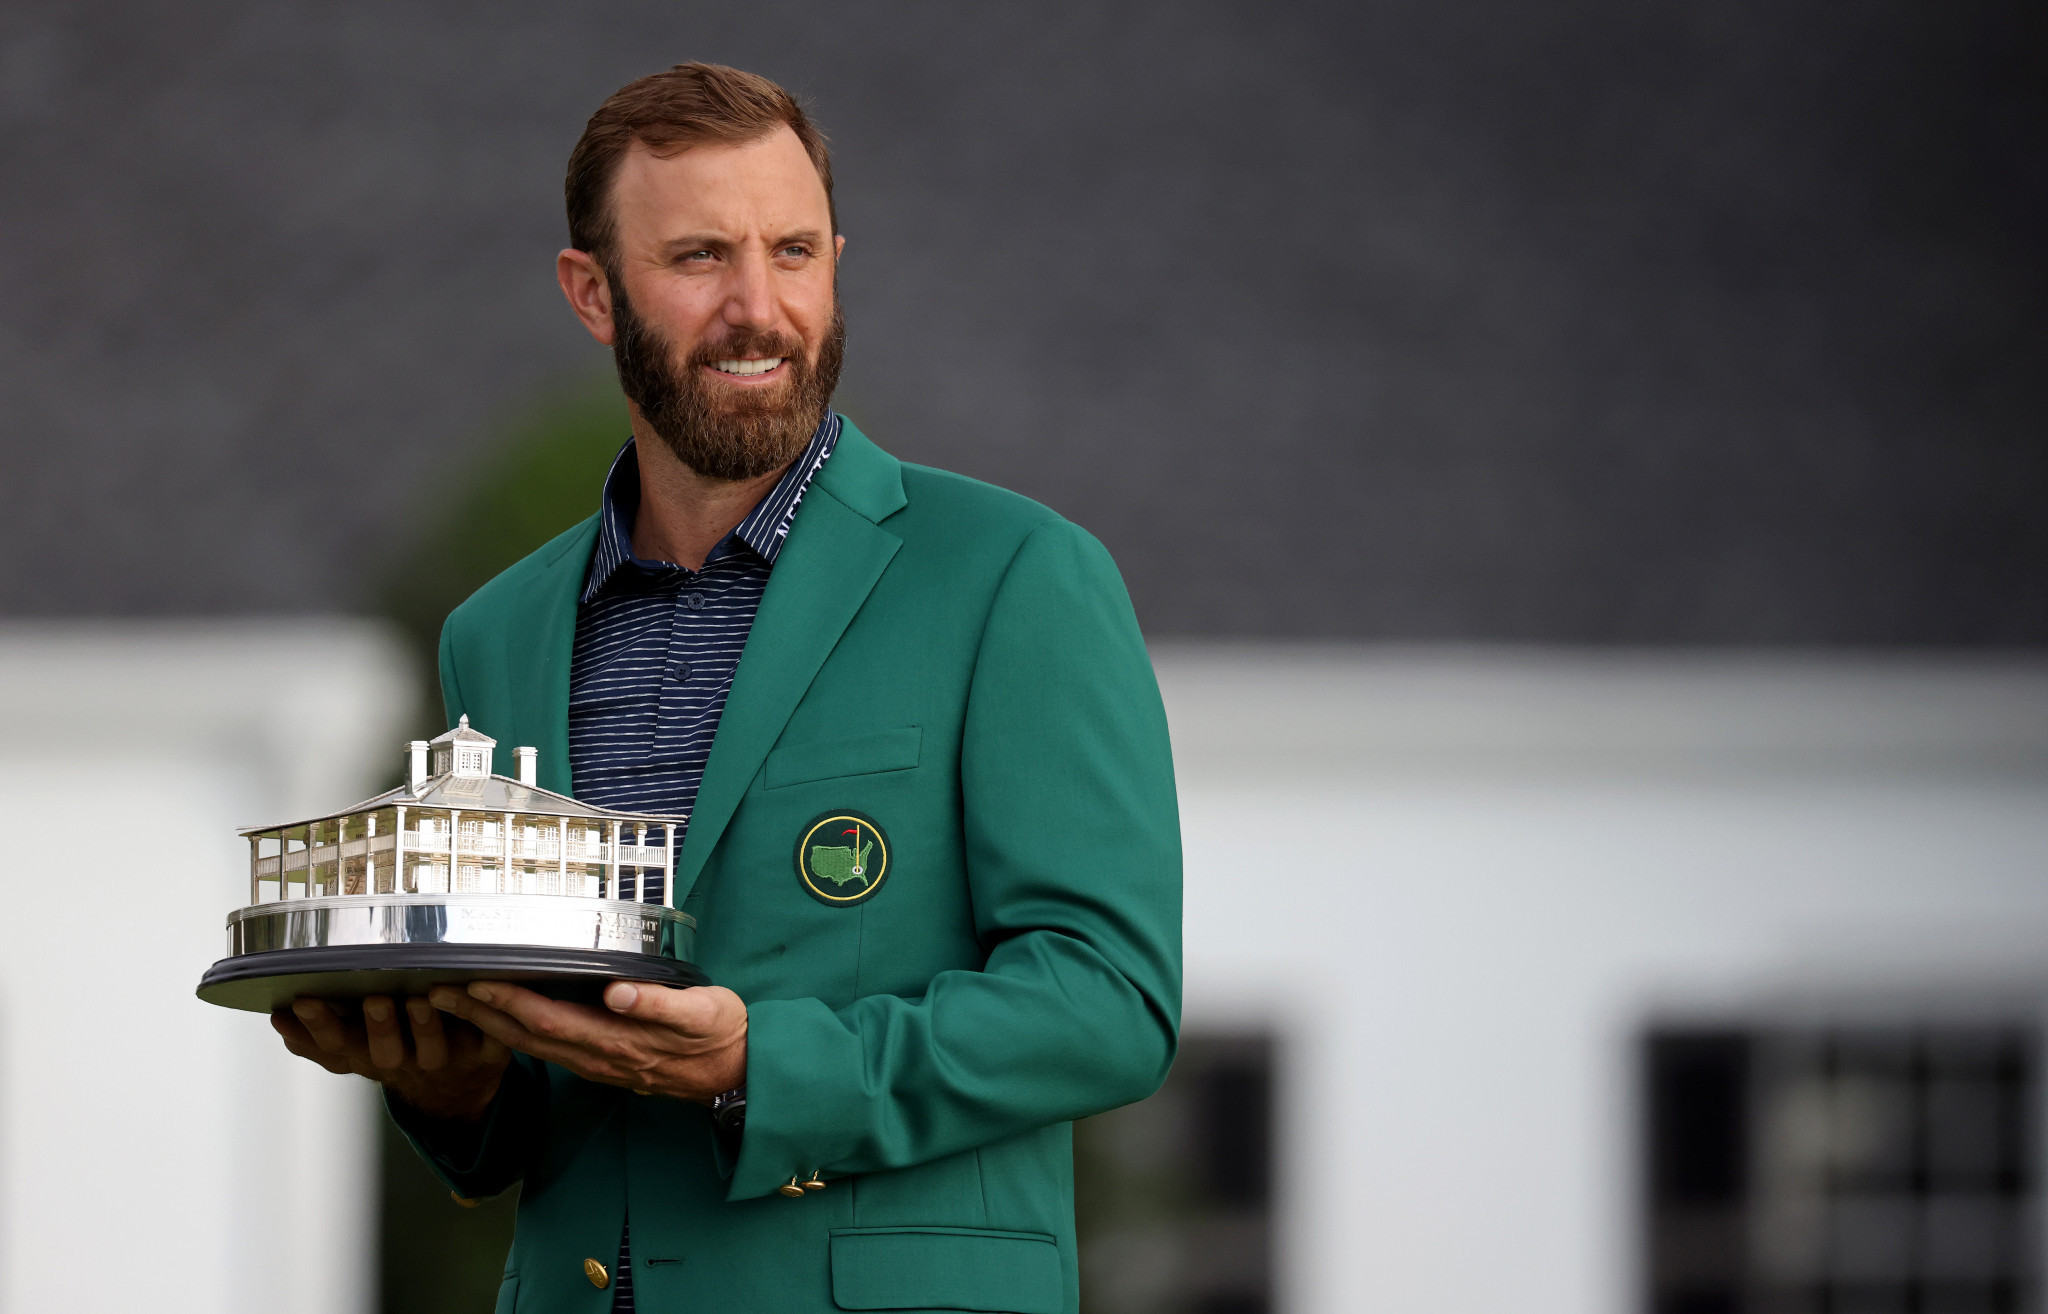 Johnson wins Masters by five shots with record 20-under-par score